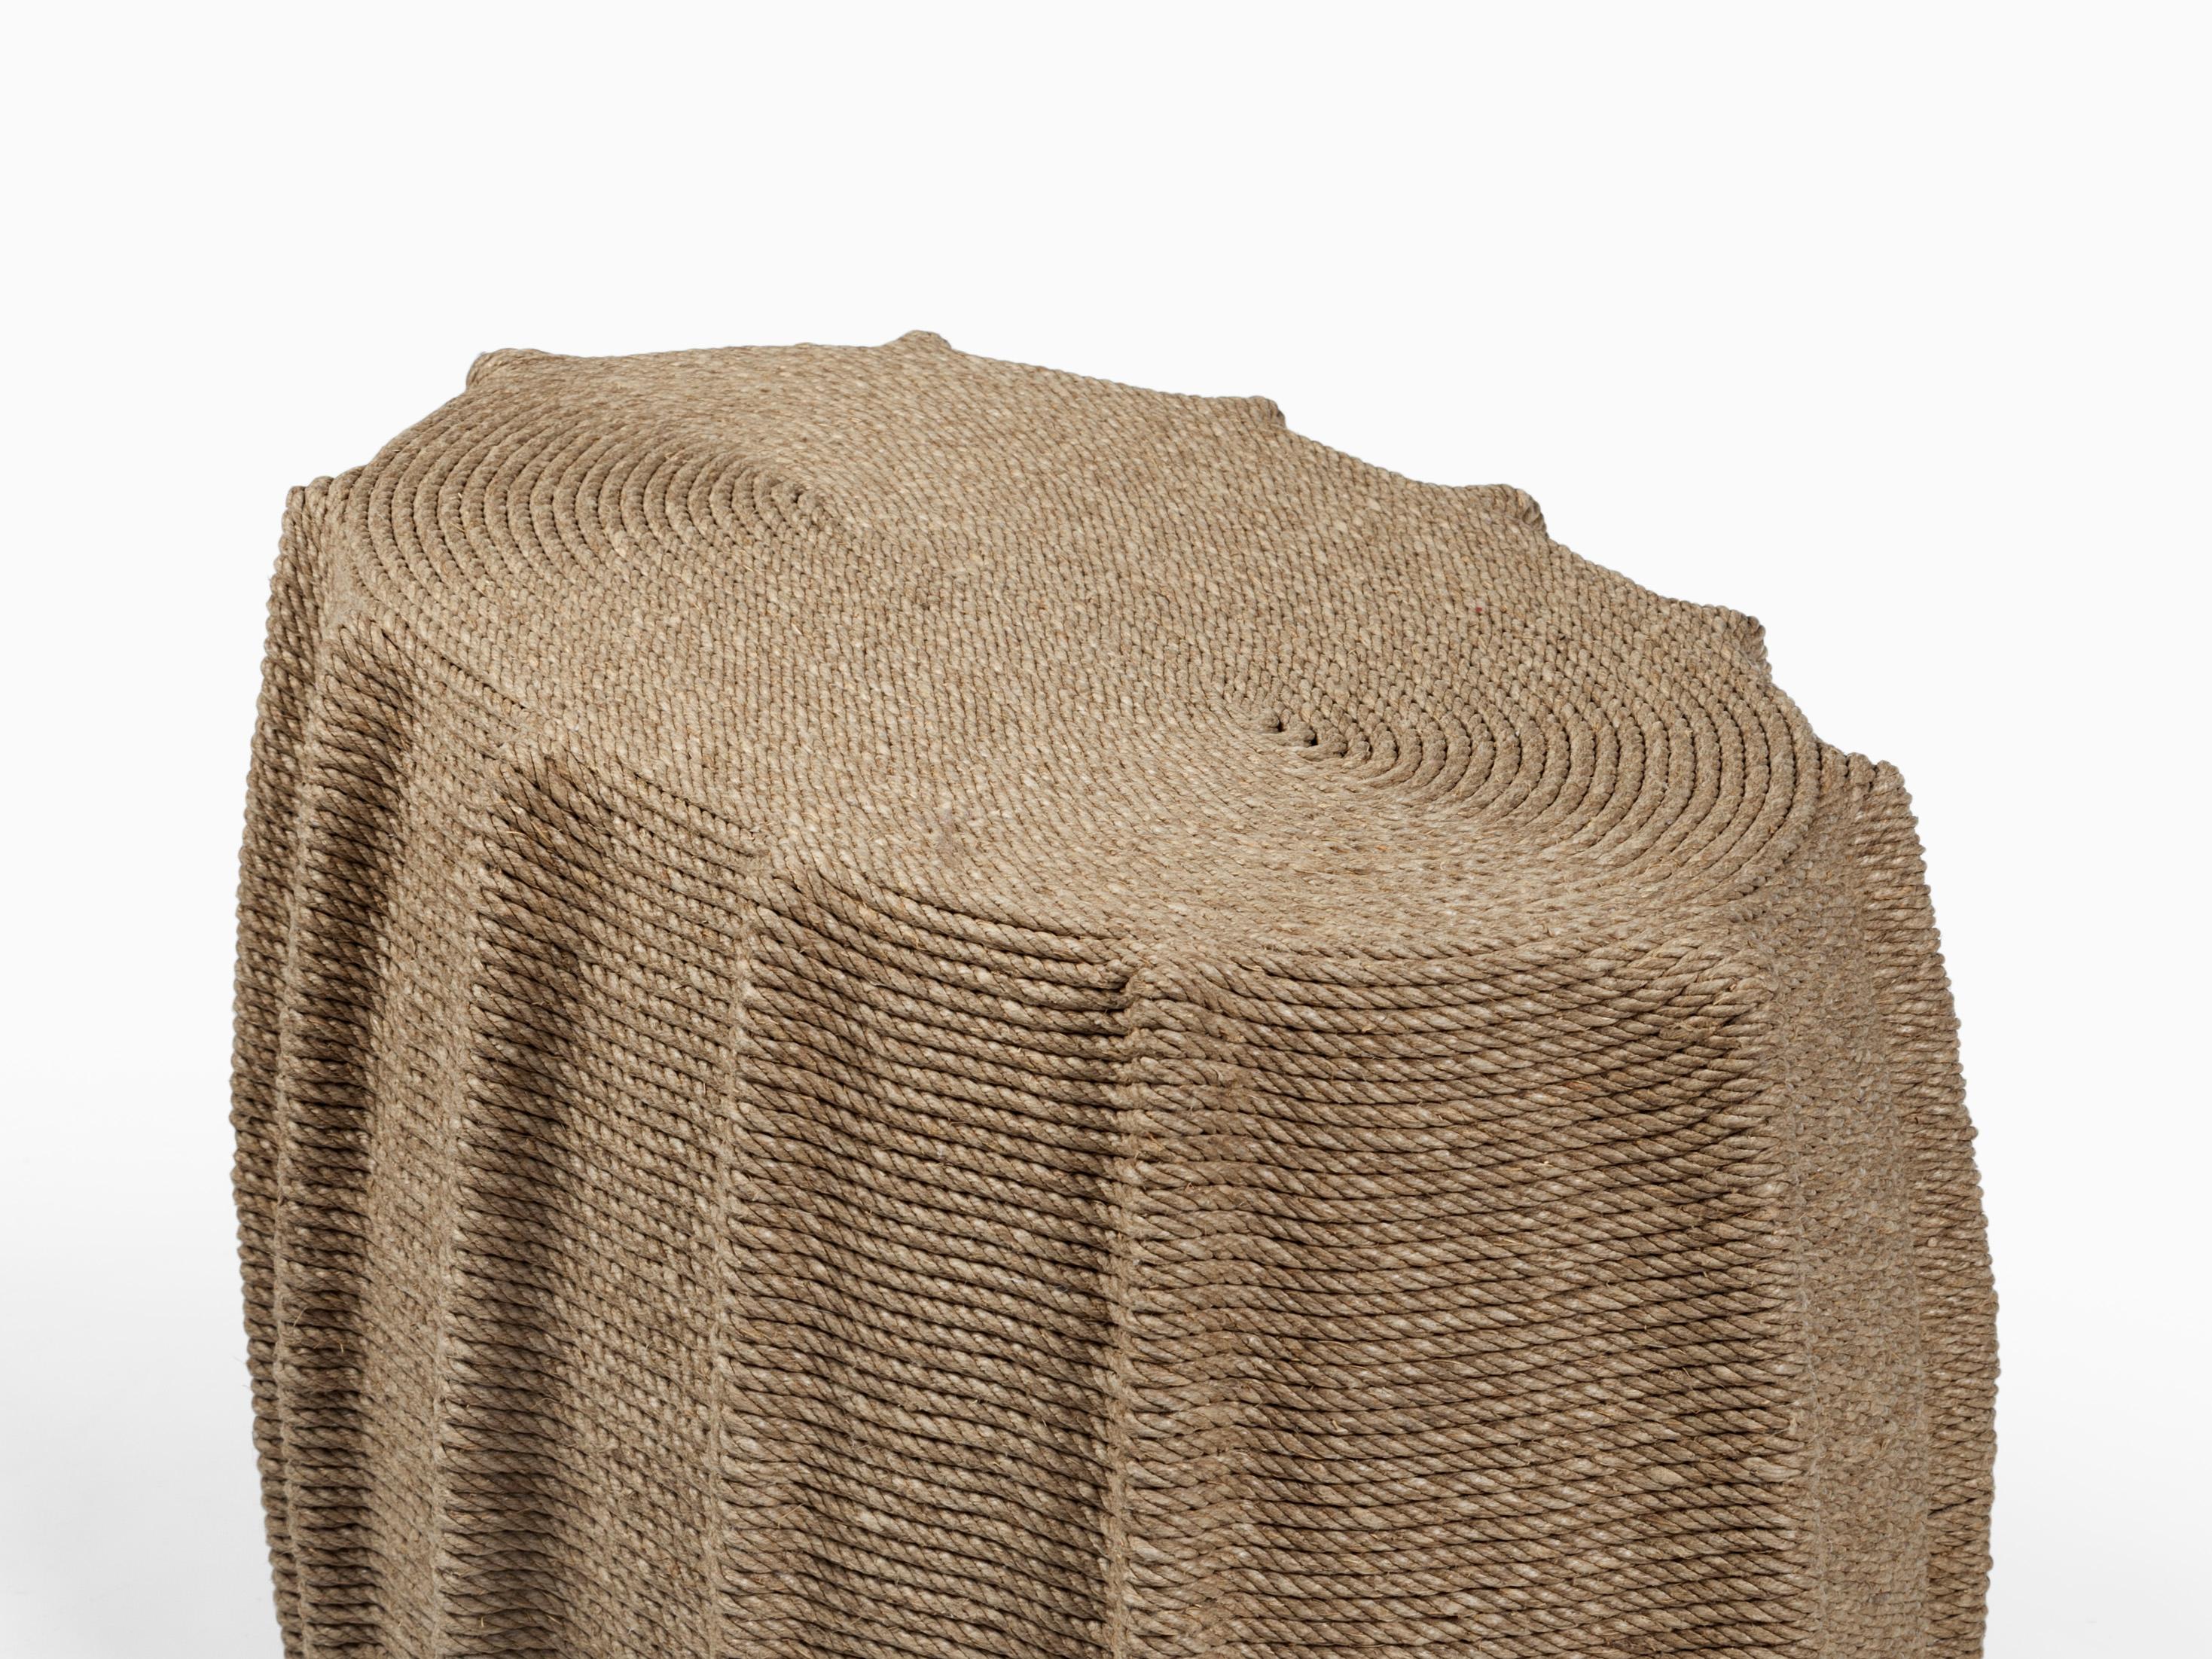 Holly Hunt Mivale occassiona side table in natural hemp rope by Christian Astuguevieille

Additional Information:
Materials: Natural Hemp Rope
Dimensions: 33.5 W x 19.7 D x 25.6 H inch
Available in other finish options: Ceruleum Blue Cotton